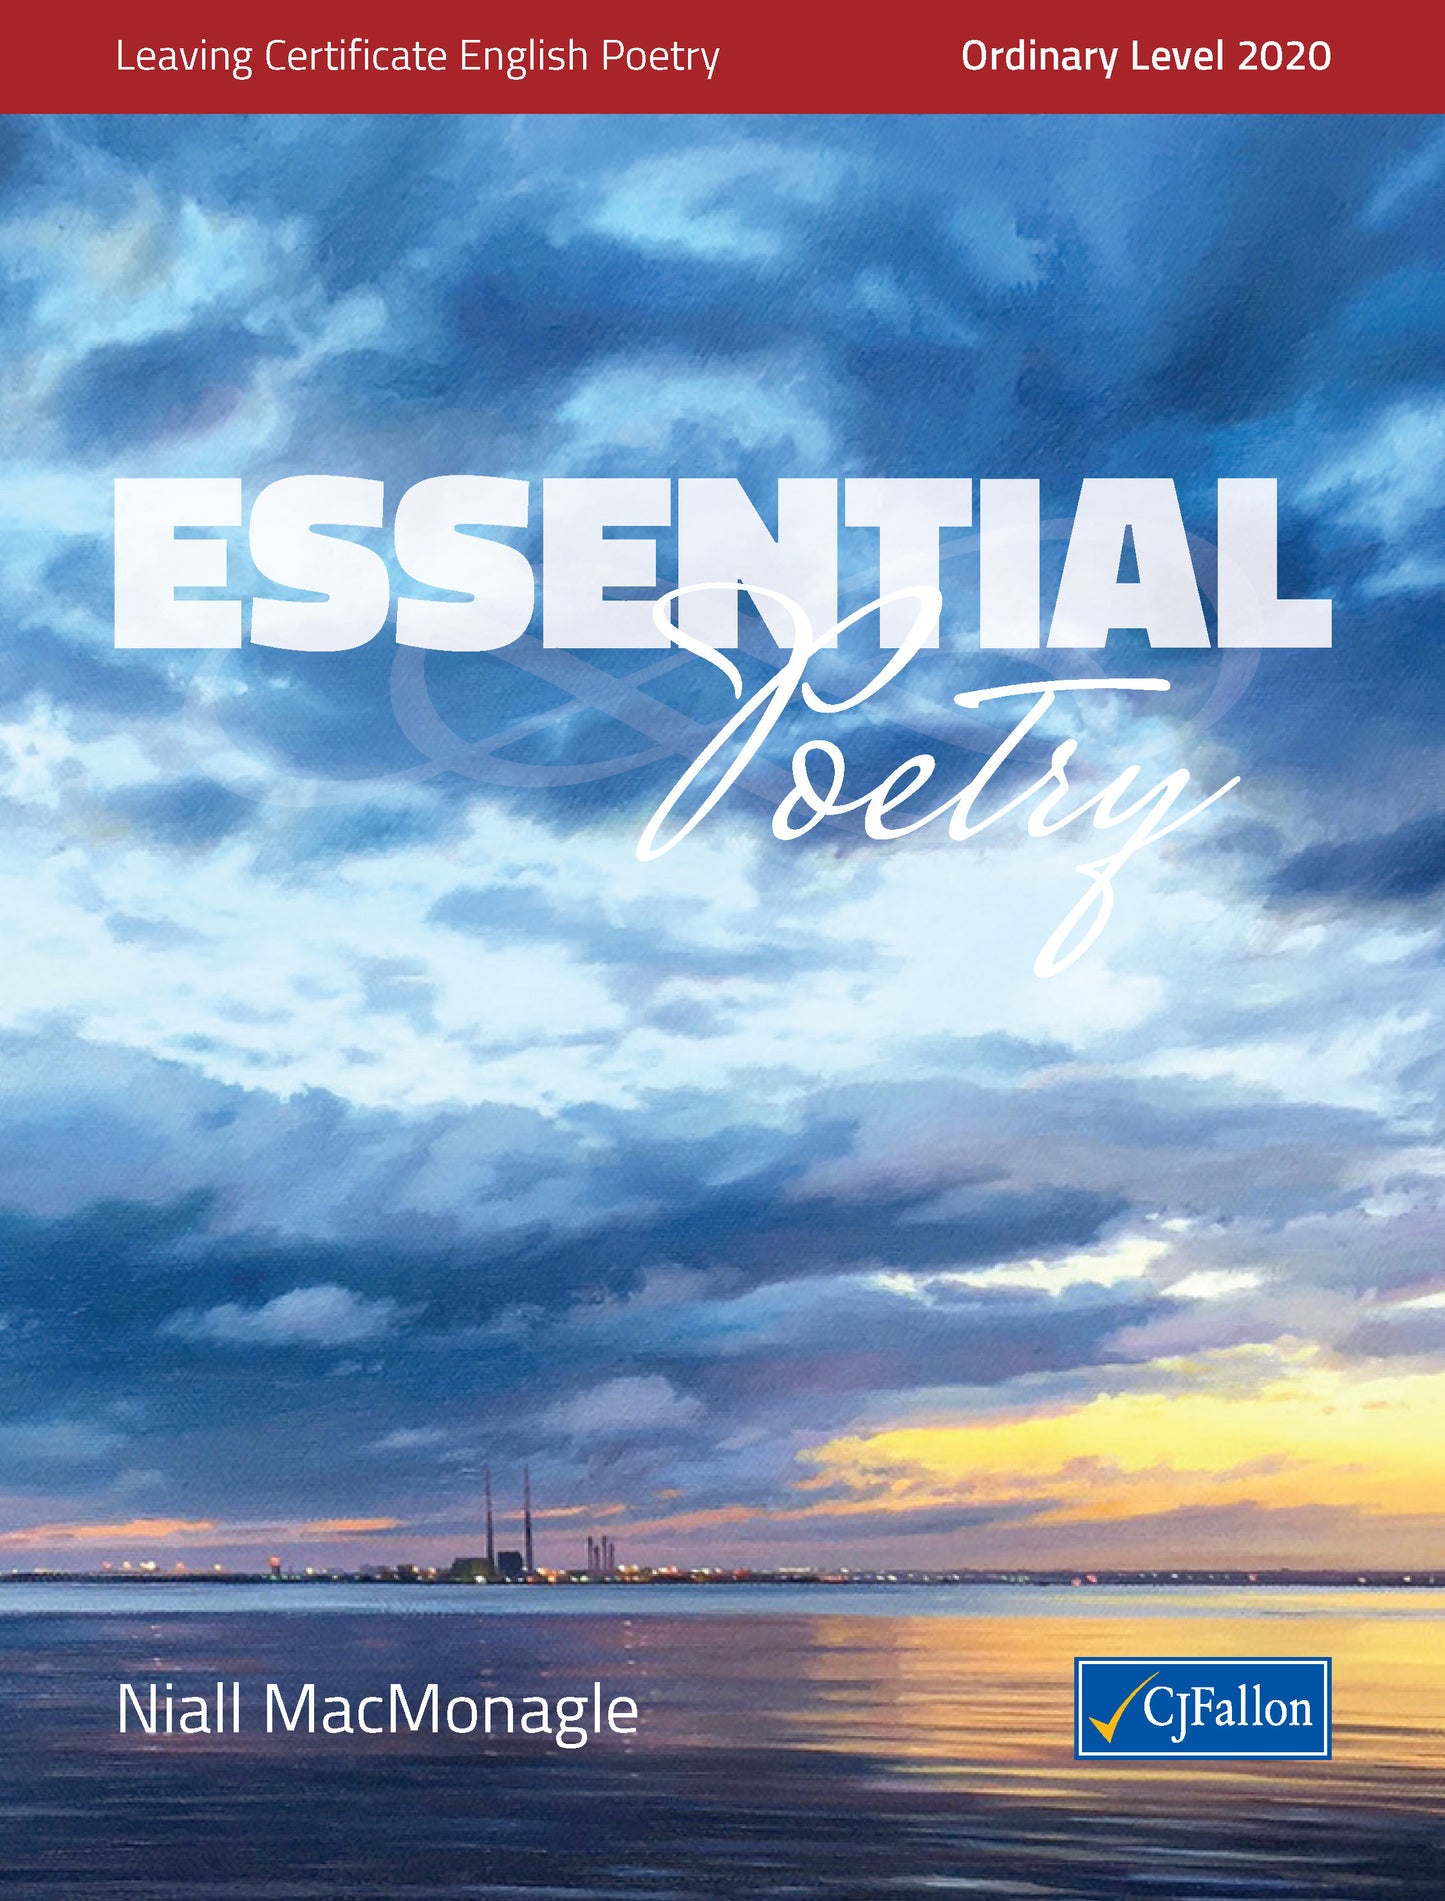 Essential Poetry 2020 NON-REFUNDABLE (Was €18.30 Now €2)